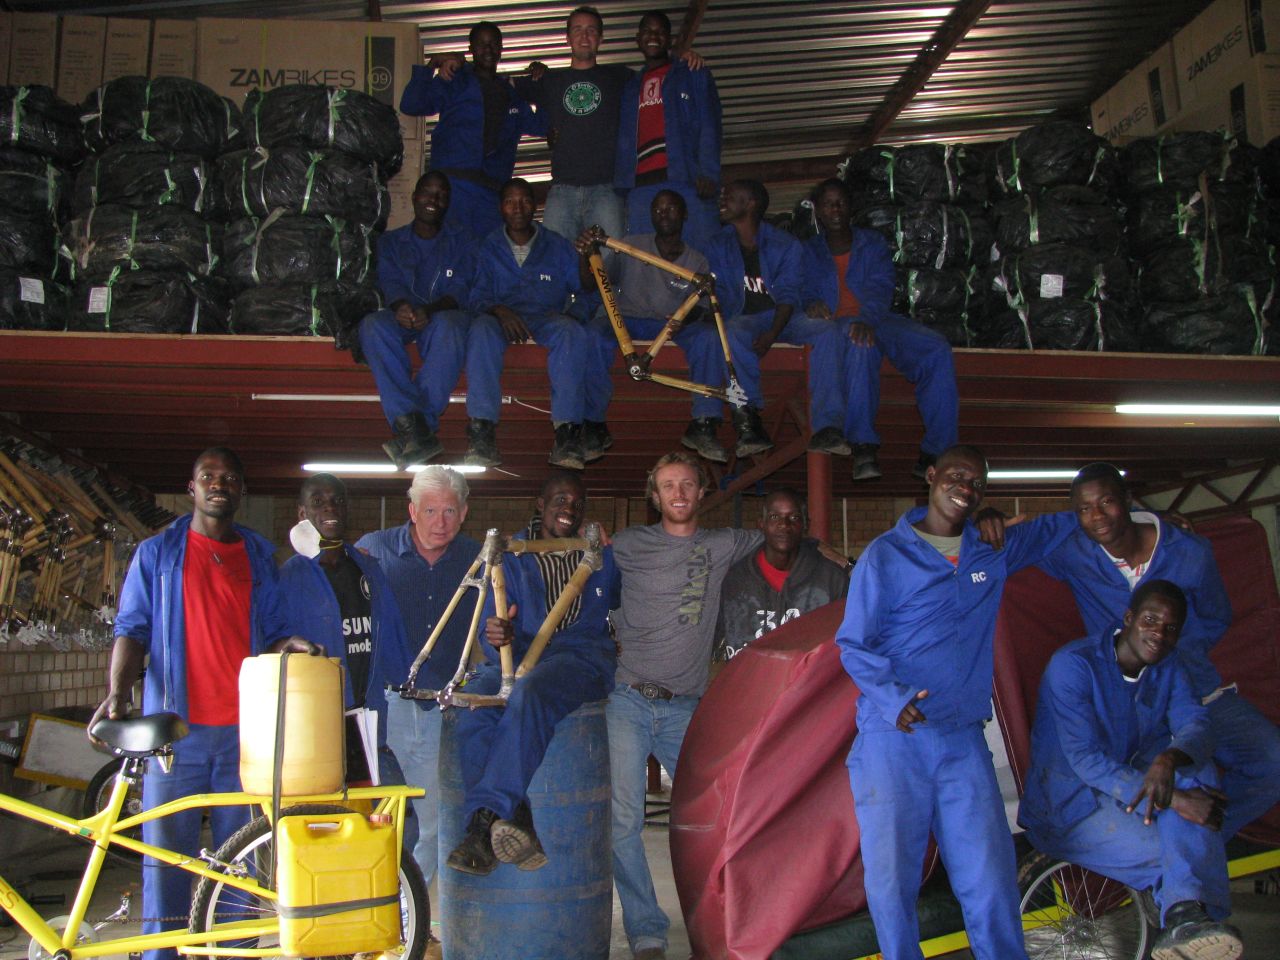 Zambikes, which employs some 40 people, is a joint venture between two Americans and two Zambians.